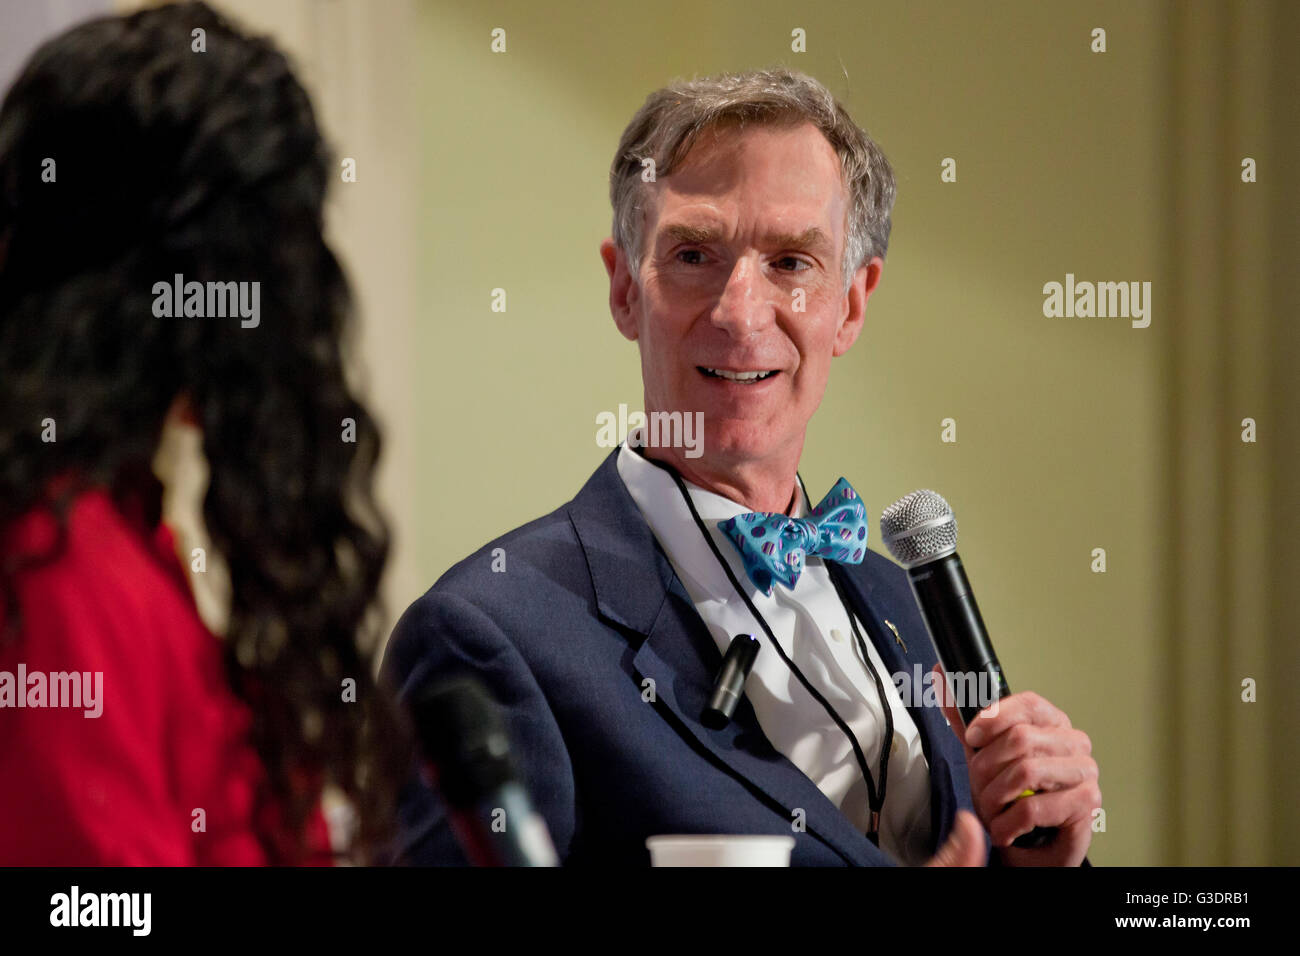 Bill Nye the Science Guy speaking at Climate Action 2016 - Washington, DC USA Stock Photo